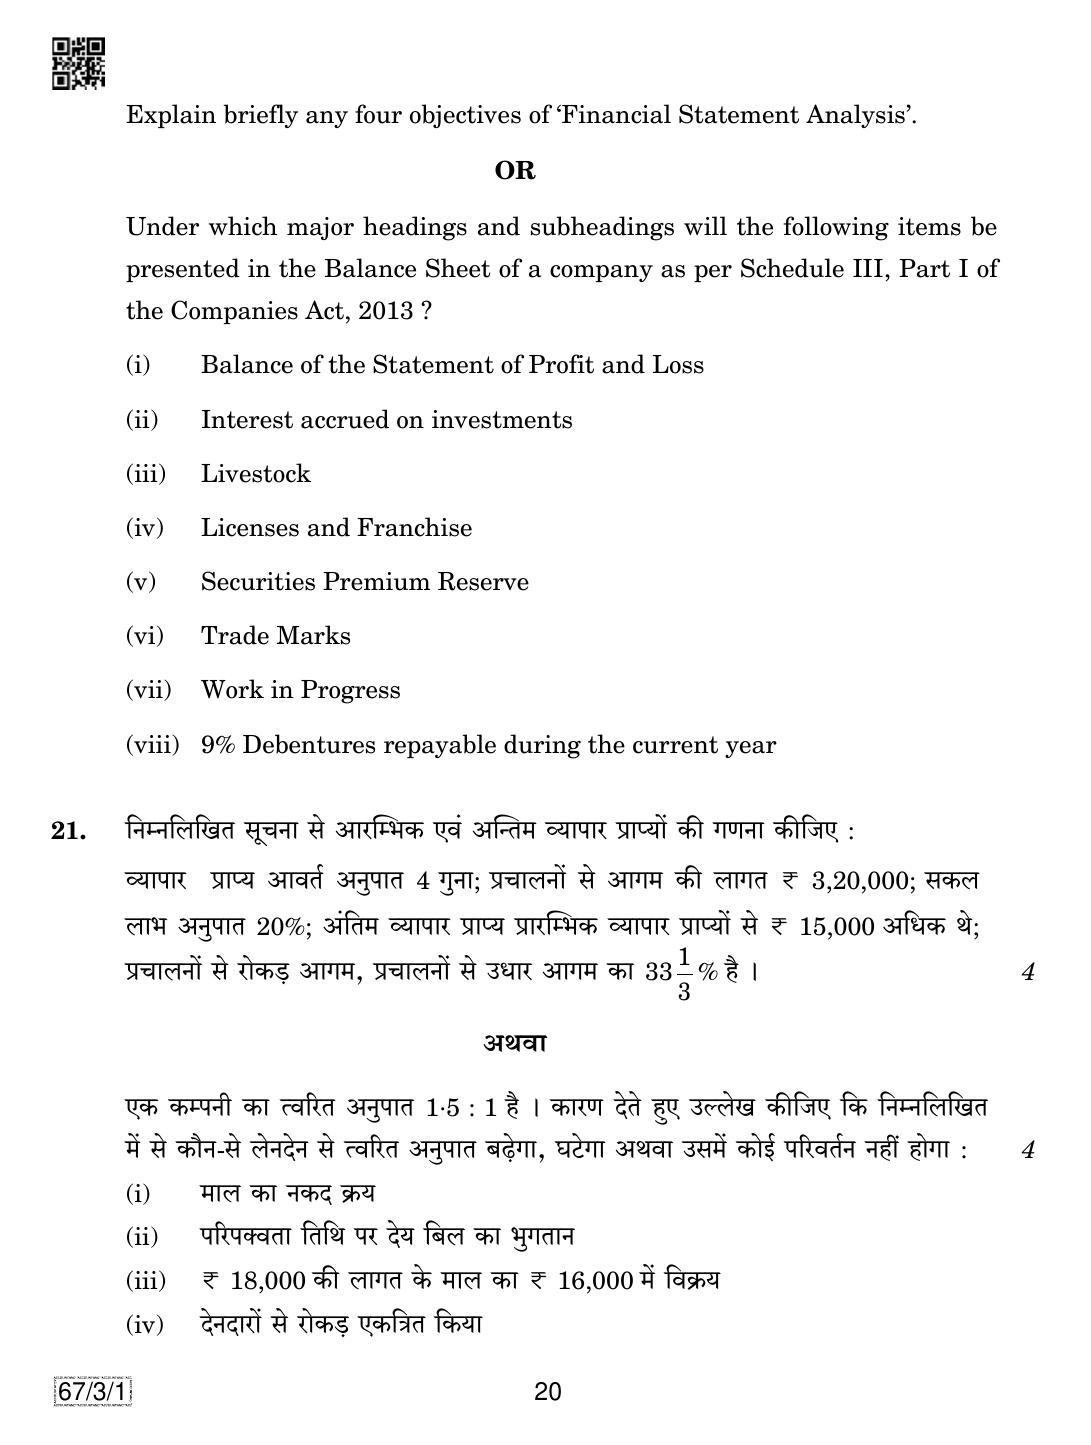 CBSE Class 12 67-3-1 Accountancy 2019 Question Paper - Page 20